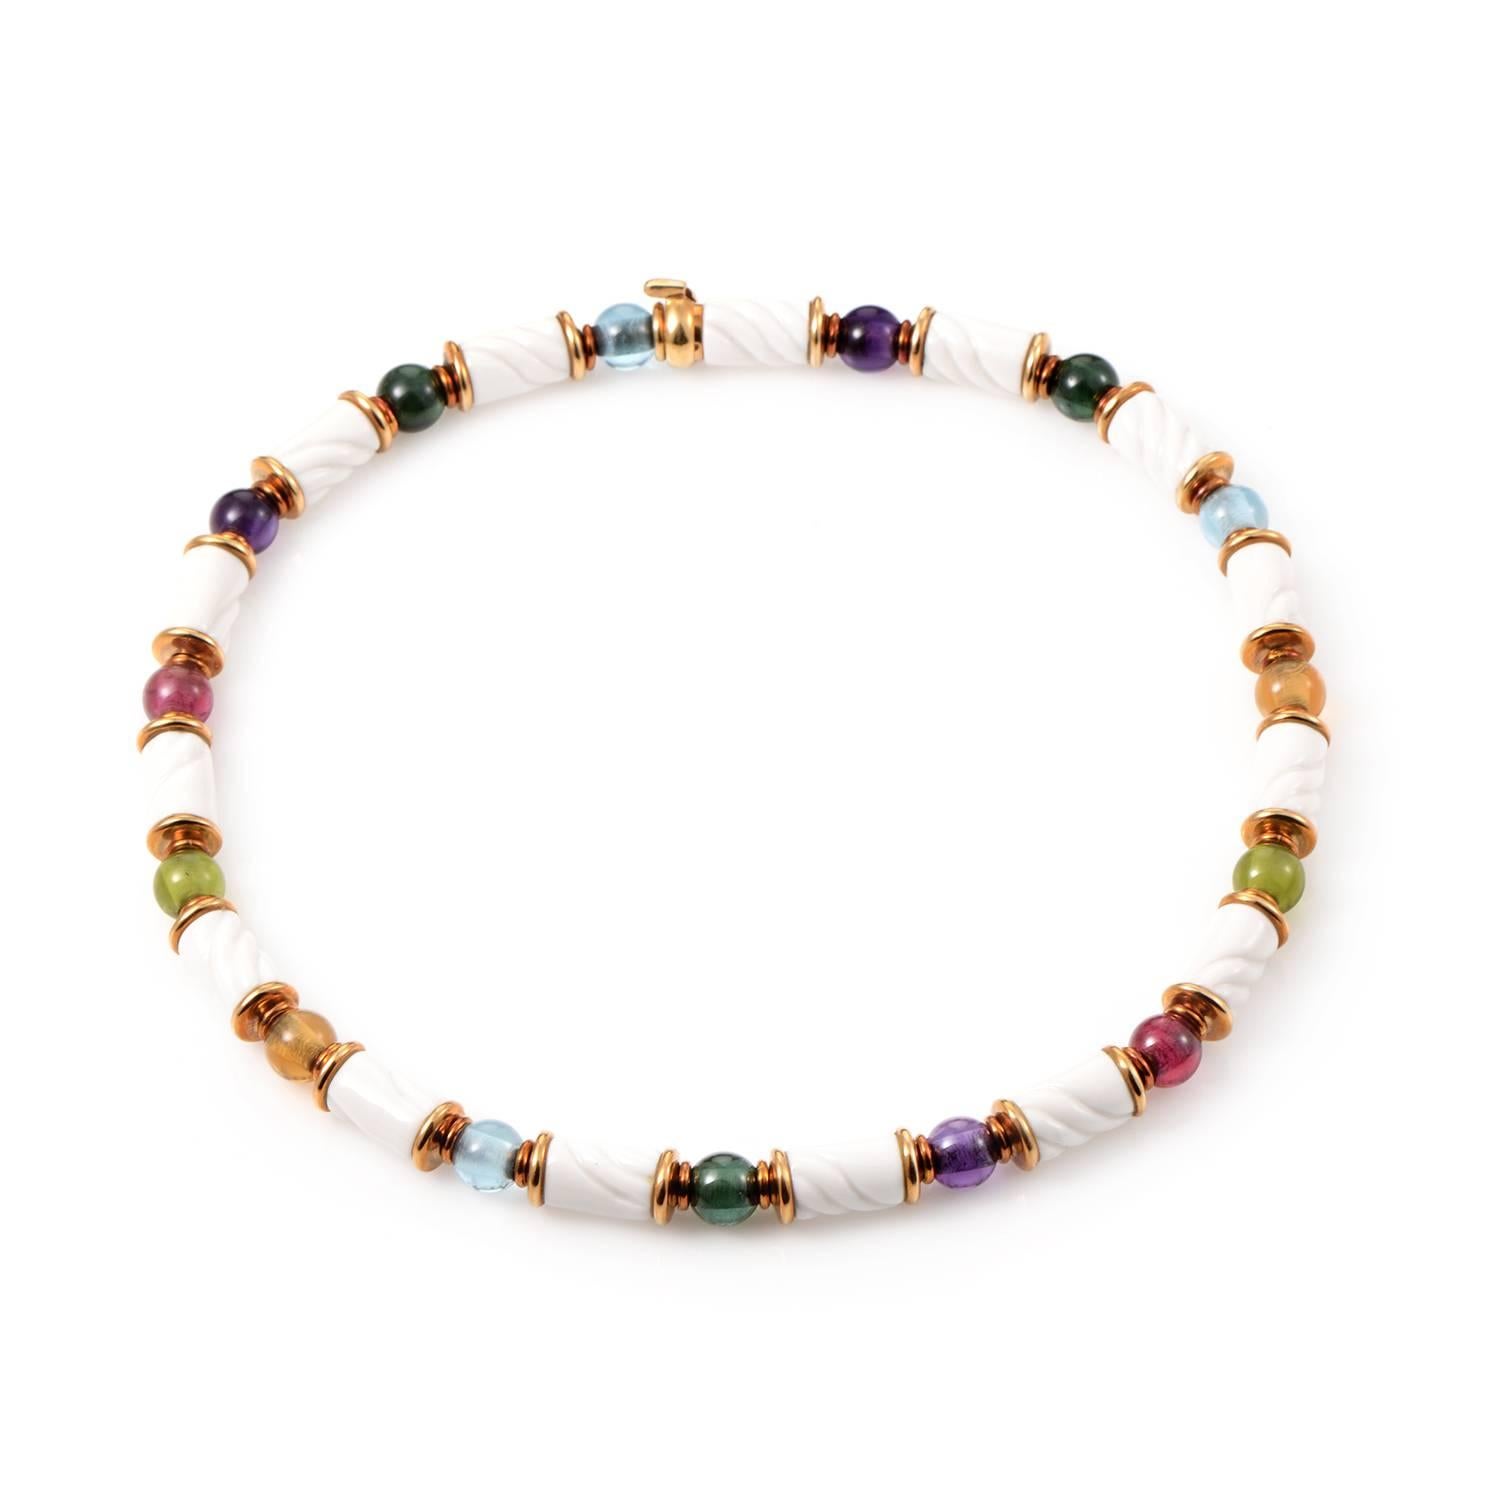 This lovely necklace designed by Bulgari is made of attractive 18K yellow gold and boasts white ceramic and numerous colorful semi-precious stones, offering unconventional eye-catching look.
Ceramic Bead Dimensions: 12 x 8mm 
Gemstone Bead